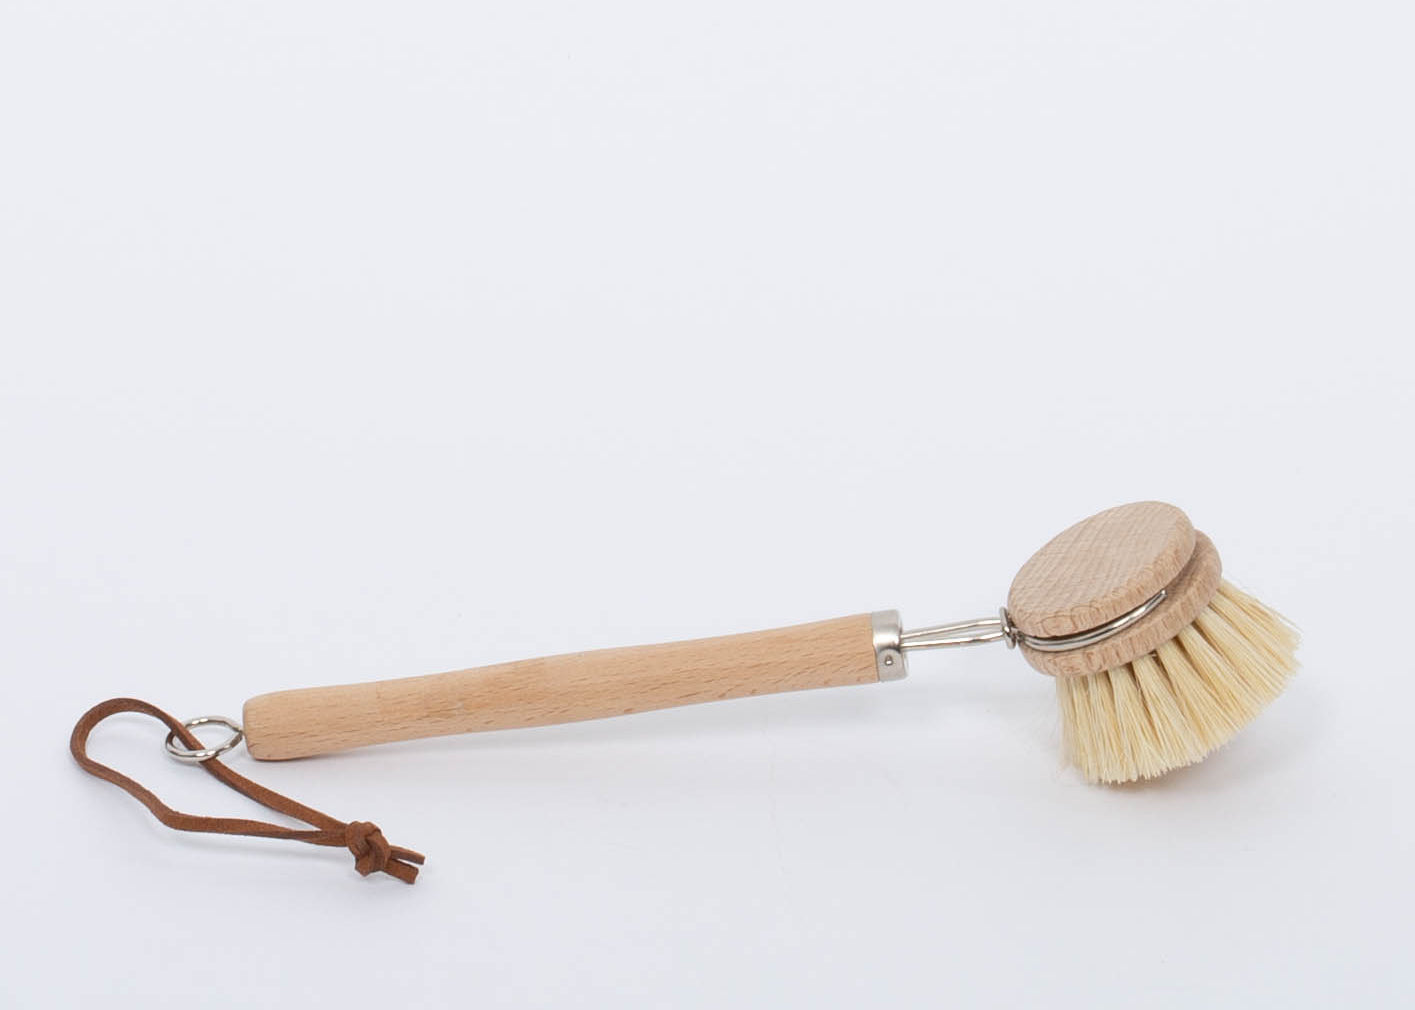 Beech Wood Flat Dish Brush with Leather Strap and silver accents for hard to reach places with angled head and nine inch handle. Brush facing down on white background. 